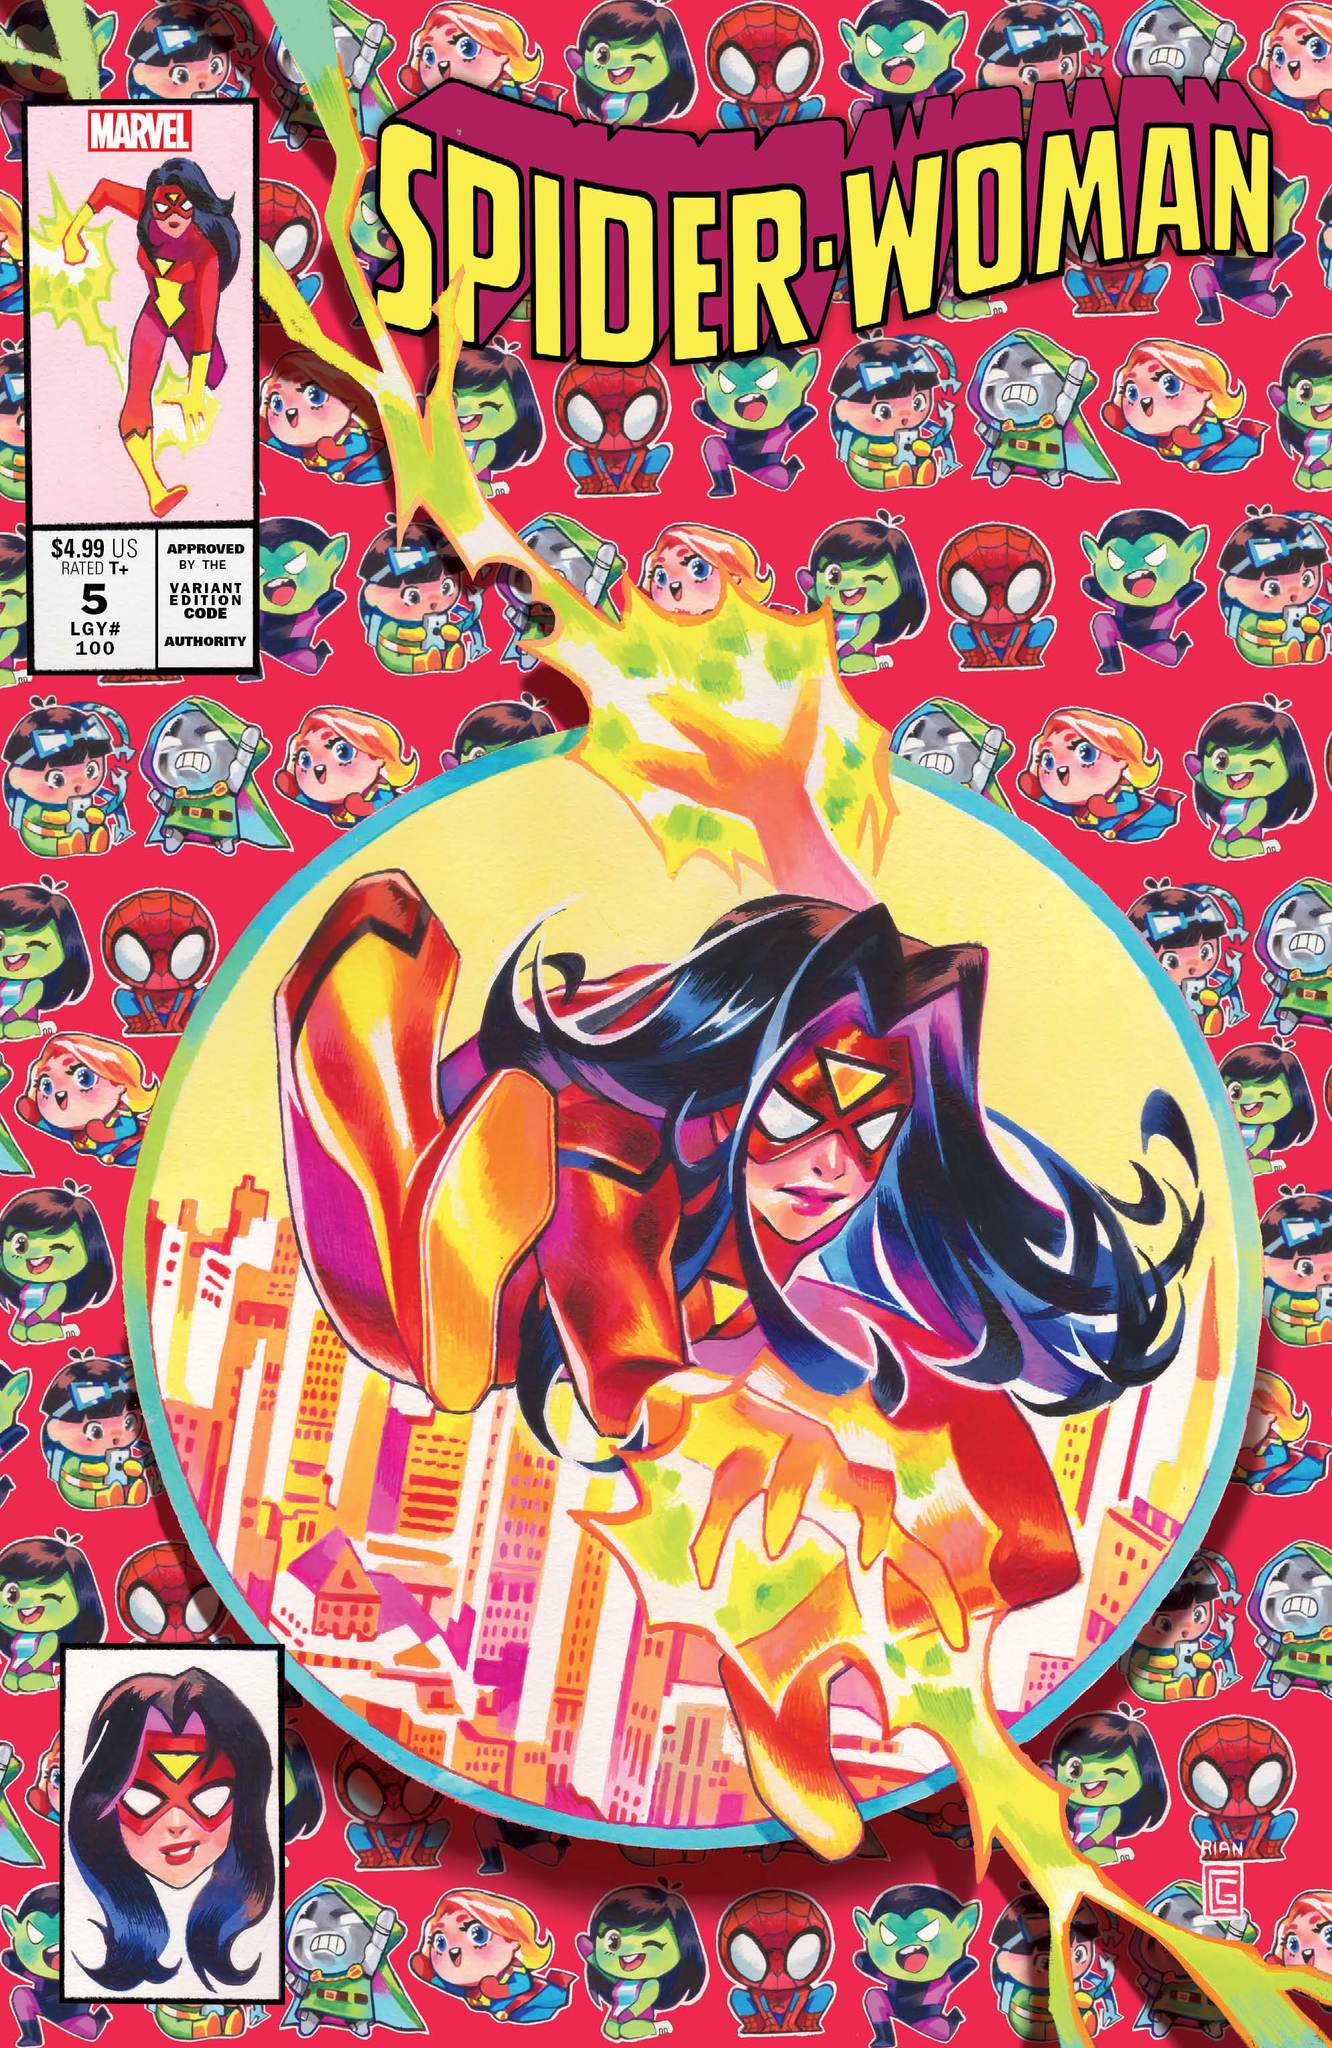 SPIDER-WOMAN #5 RIAN GONZALES EXCLUSIVE TRADE DRESS VARIANT